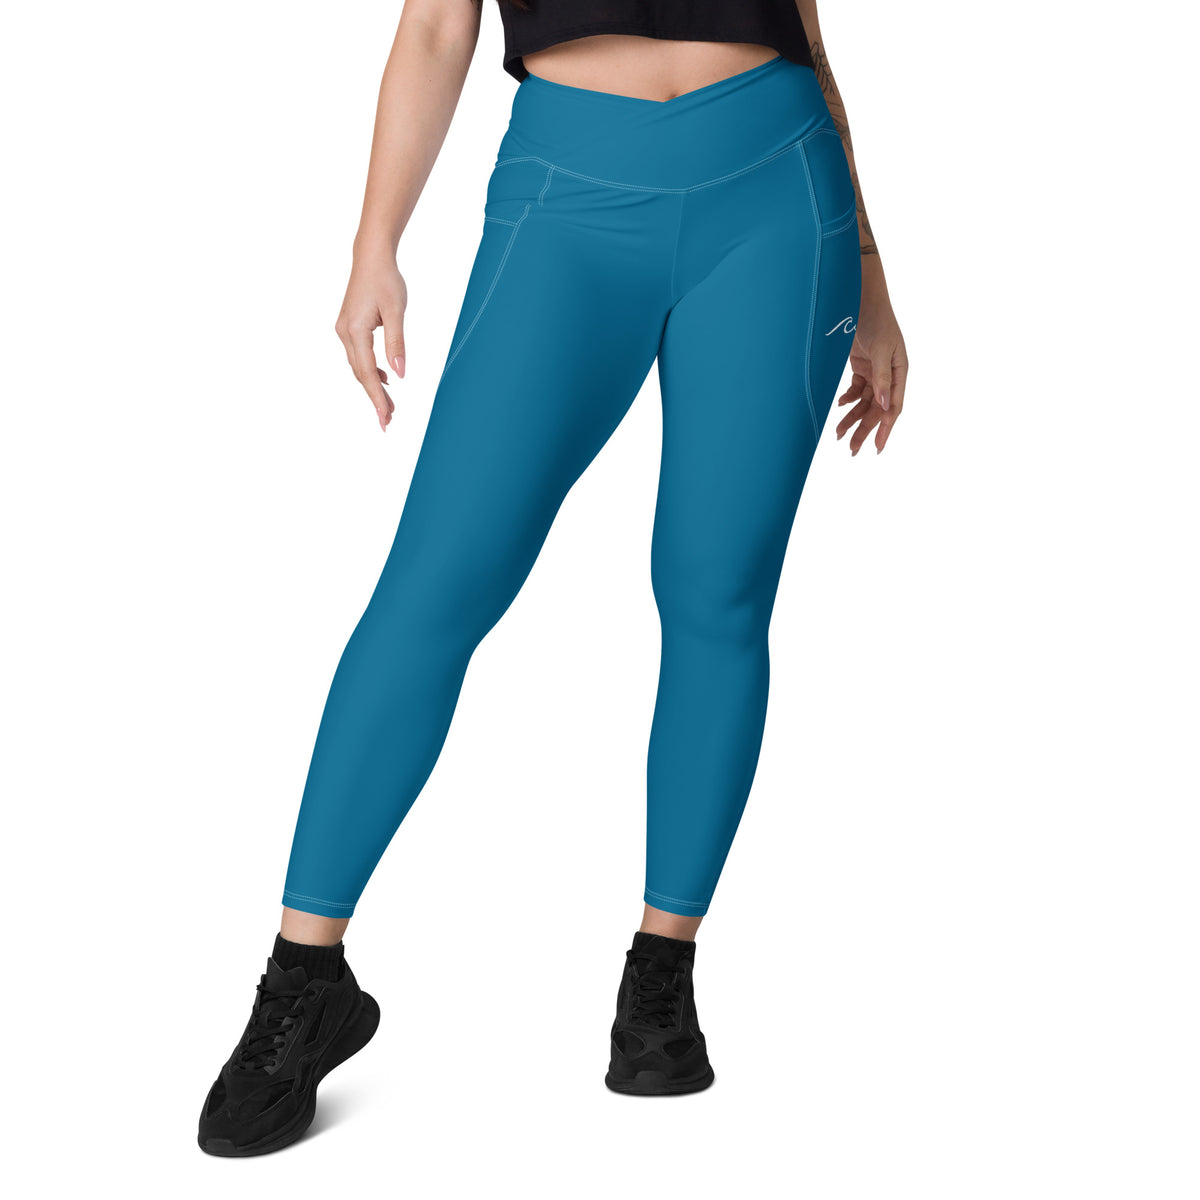 Naples Blue UPF 50+ Crossover leggings with pockets